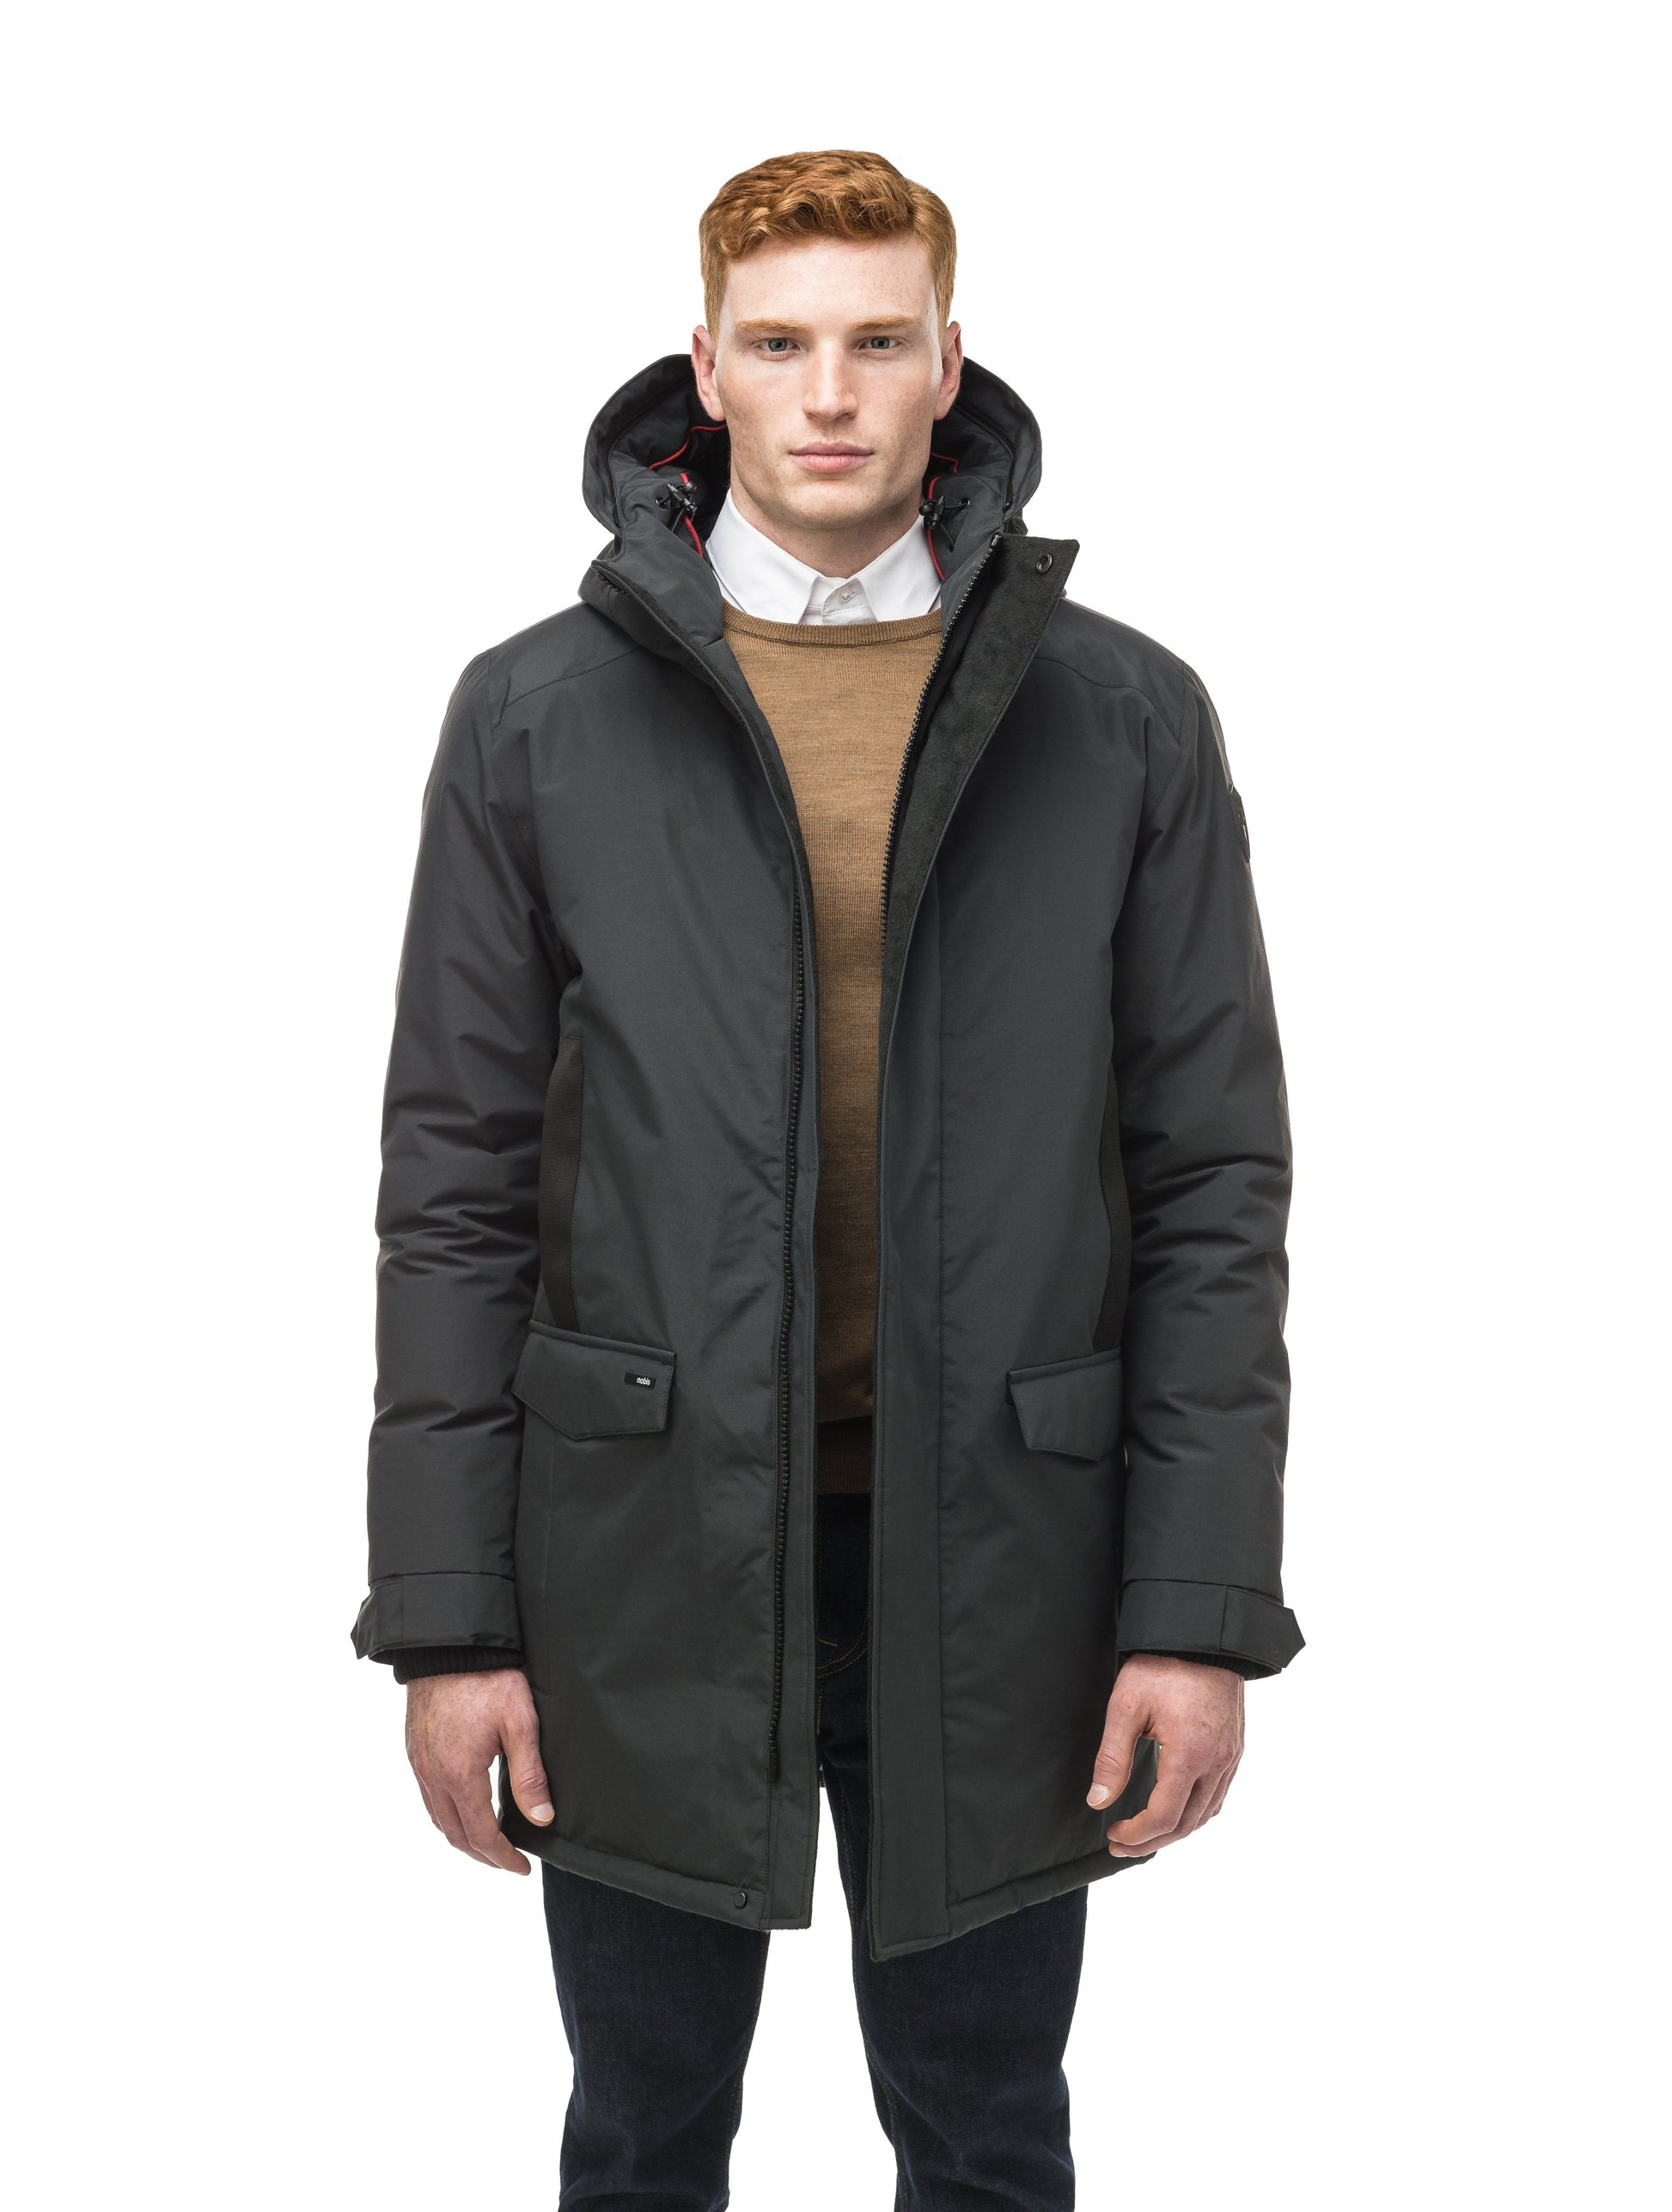 Lightweight men's parka with duck down fill and removable fur trim around the hood in Black